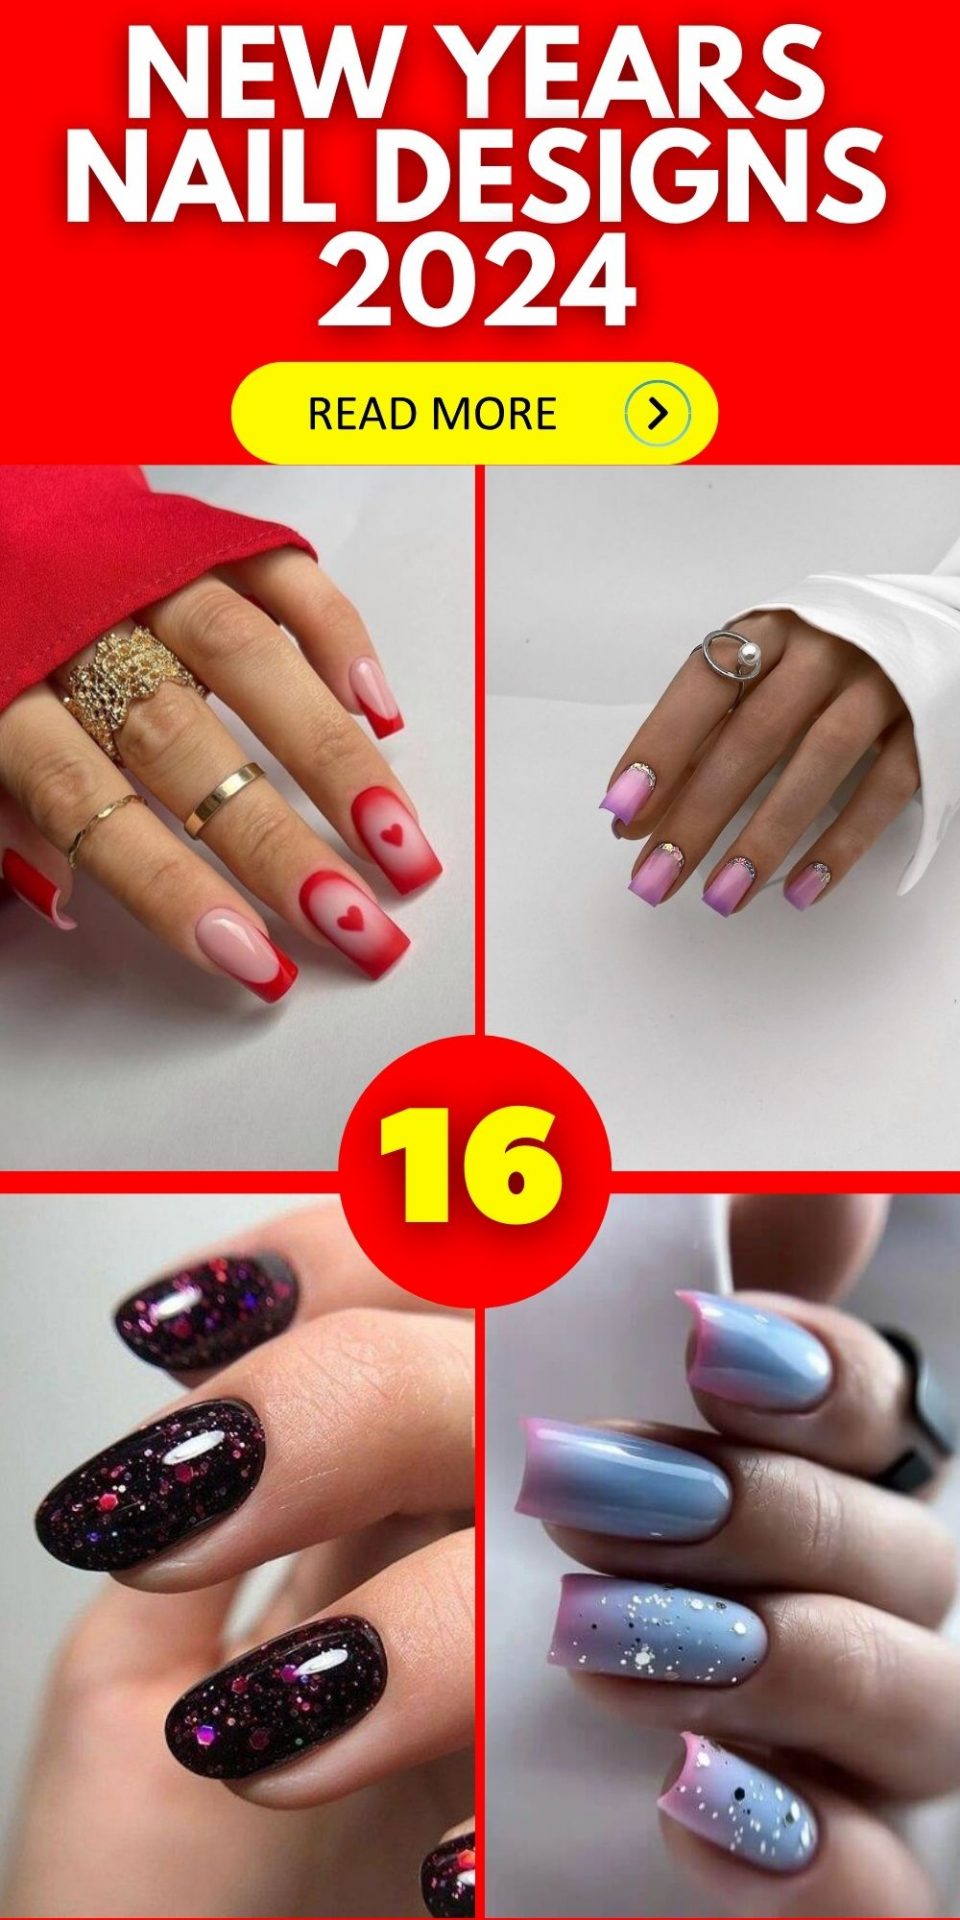 New Year's Nail Designs 2024: Explore Red, Blue, Black & Glitter Bling ...